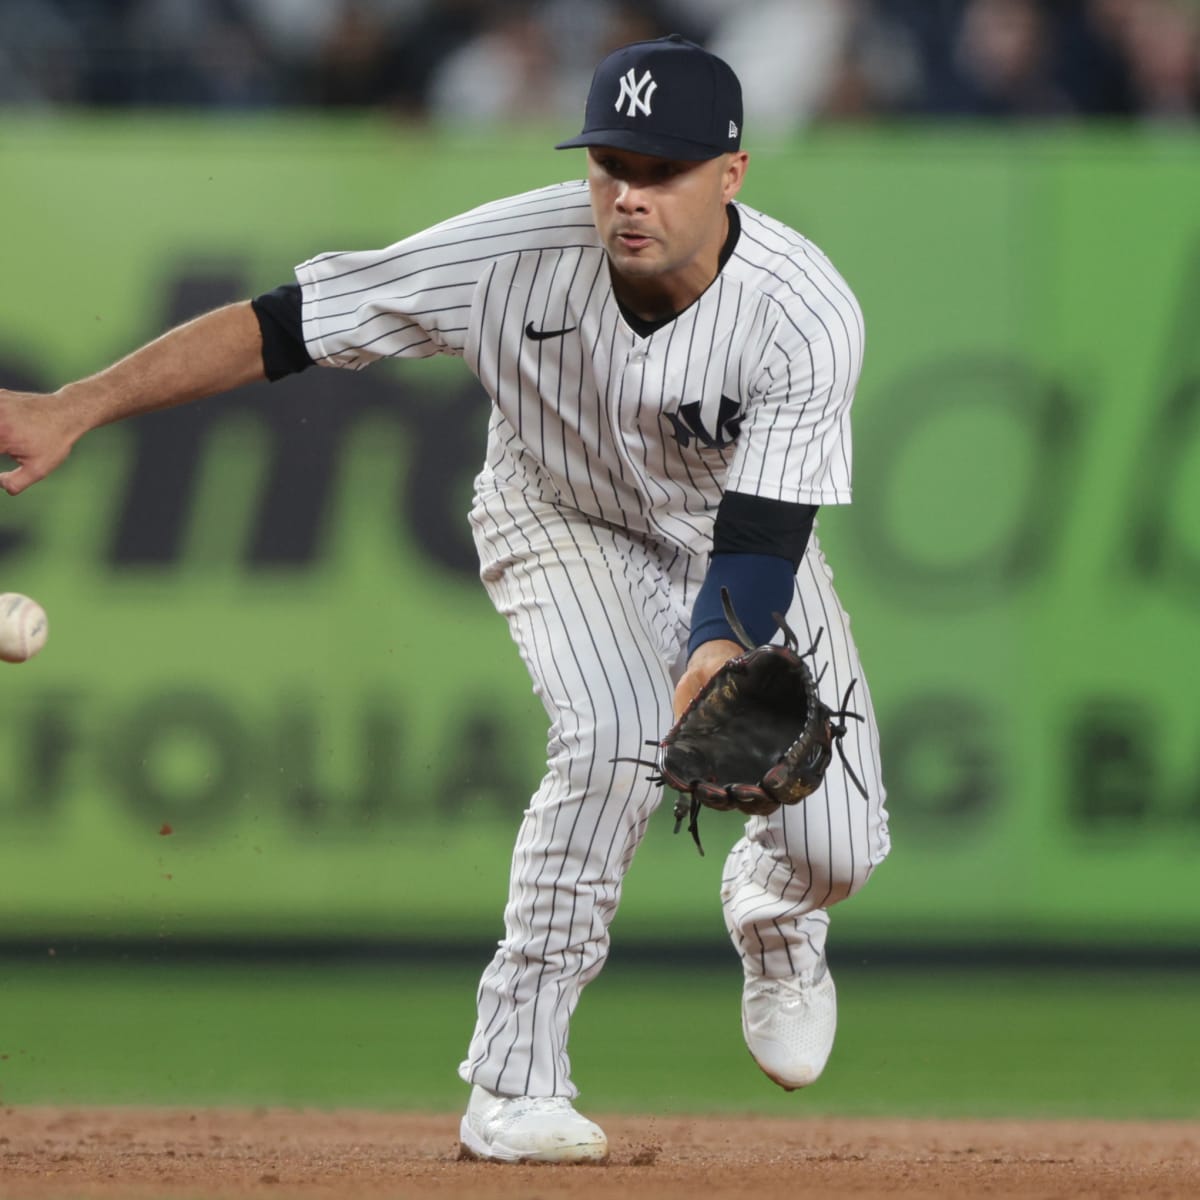 Kiner-Falefa Wins Over Yankees Teammates With His Attitude